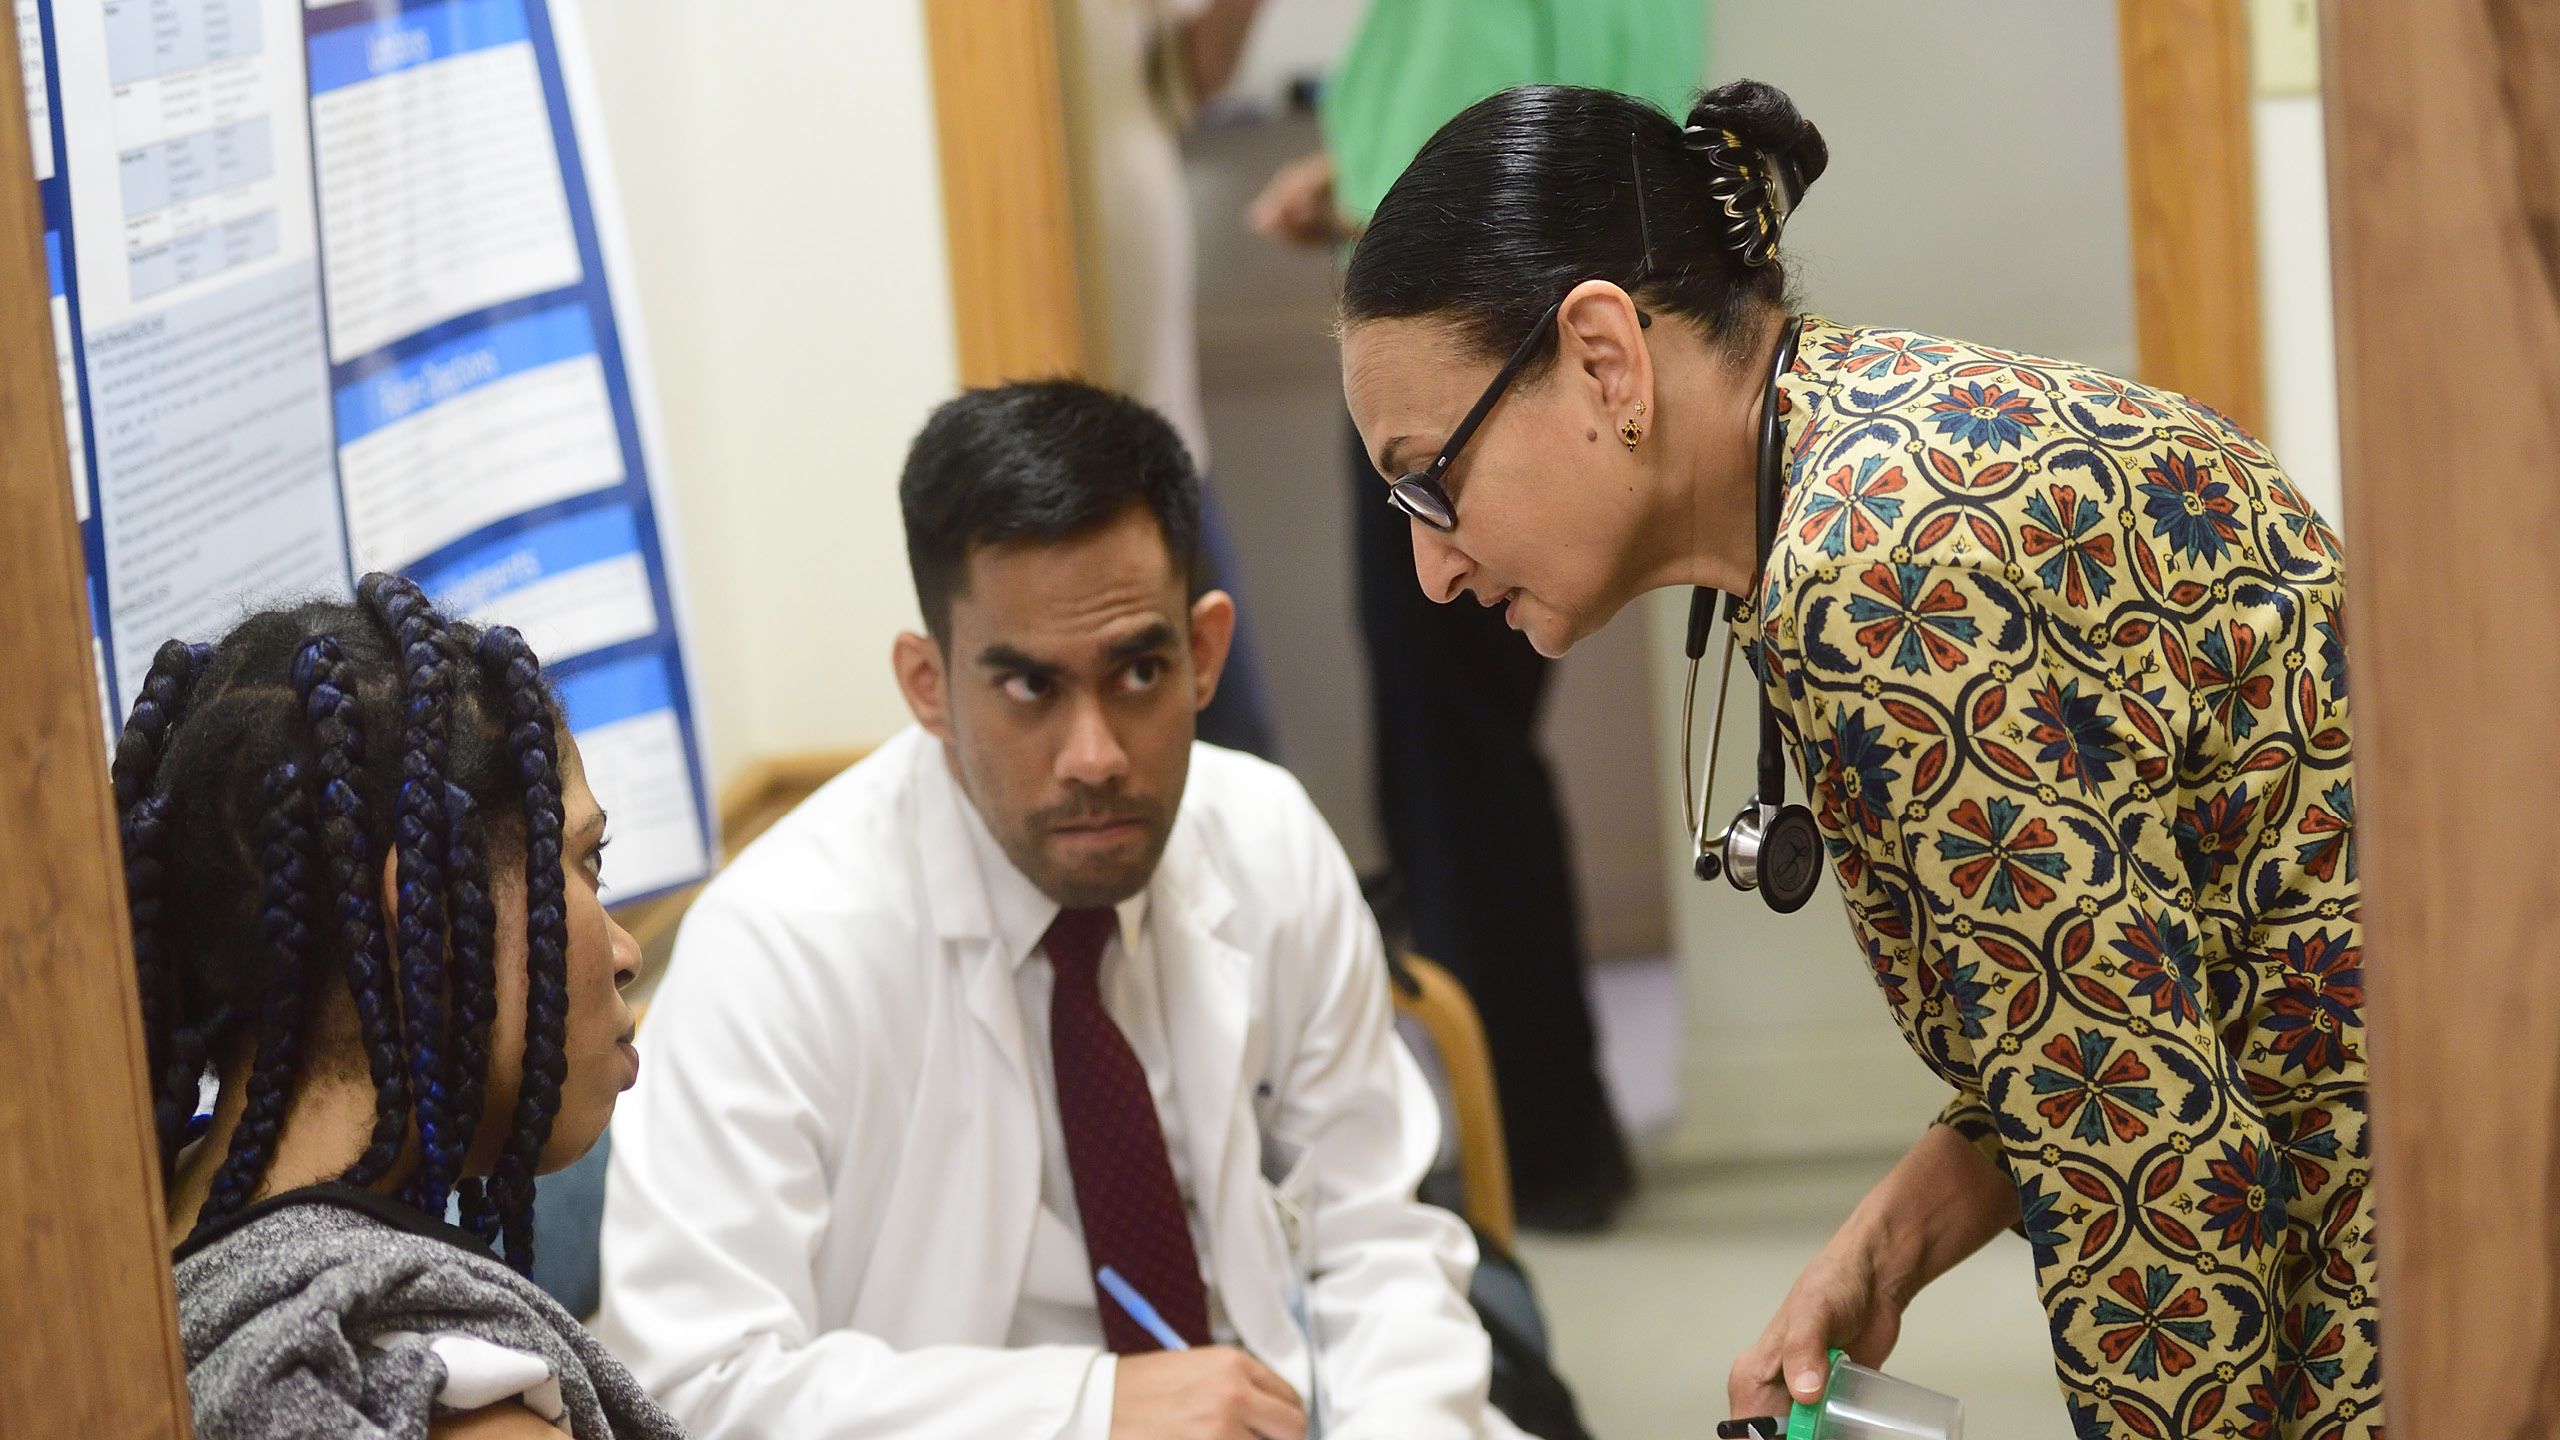 An Emory medical student talks with a doctor and a patient at the Clarkston clinic.